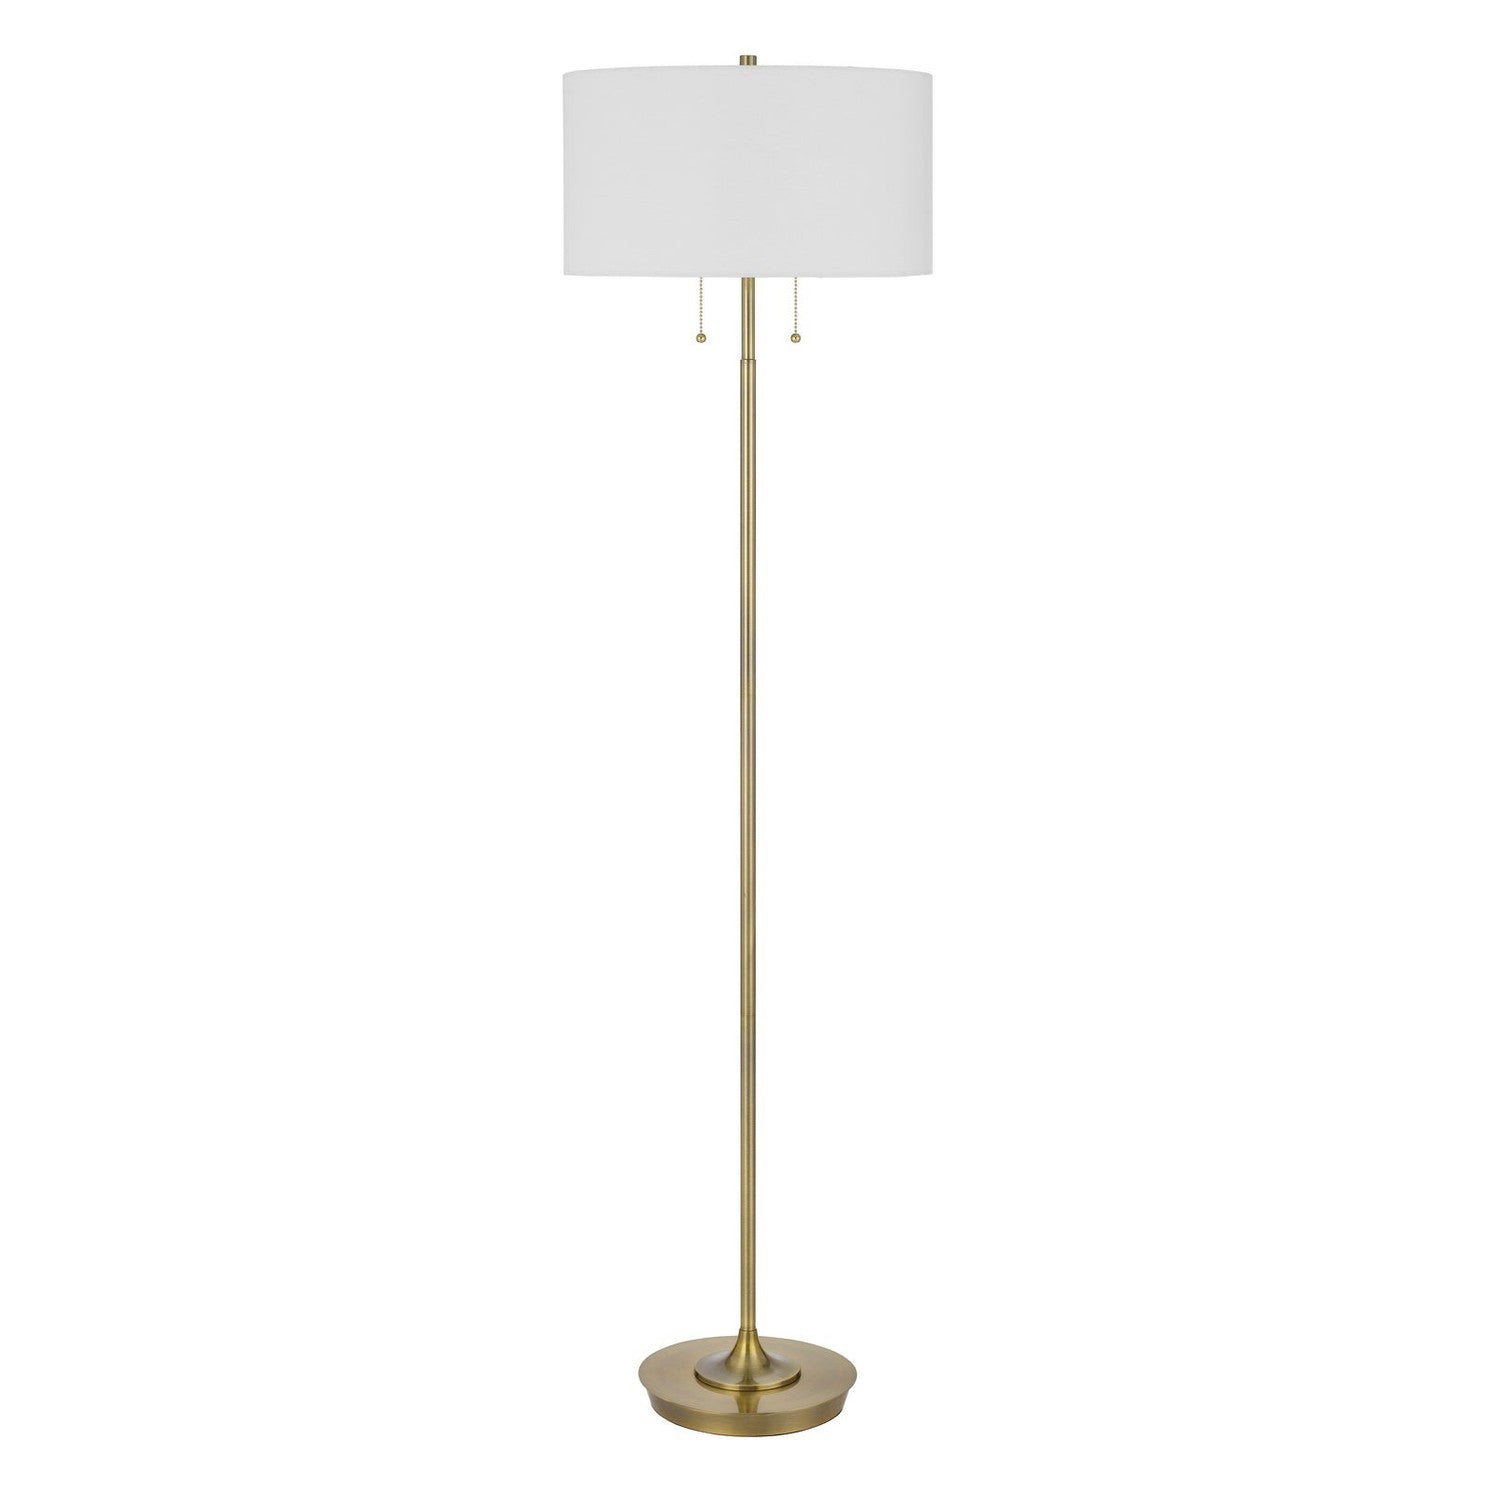 Kendal metal floor lamp with pull chain switch, drum fabric shade-Cal Lighting-CAL-BO-3028FL-Floor Lamps-1-France and Son